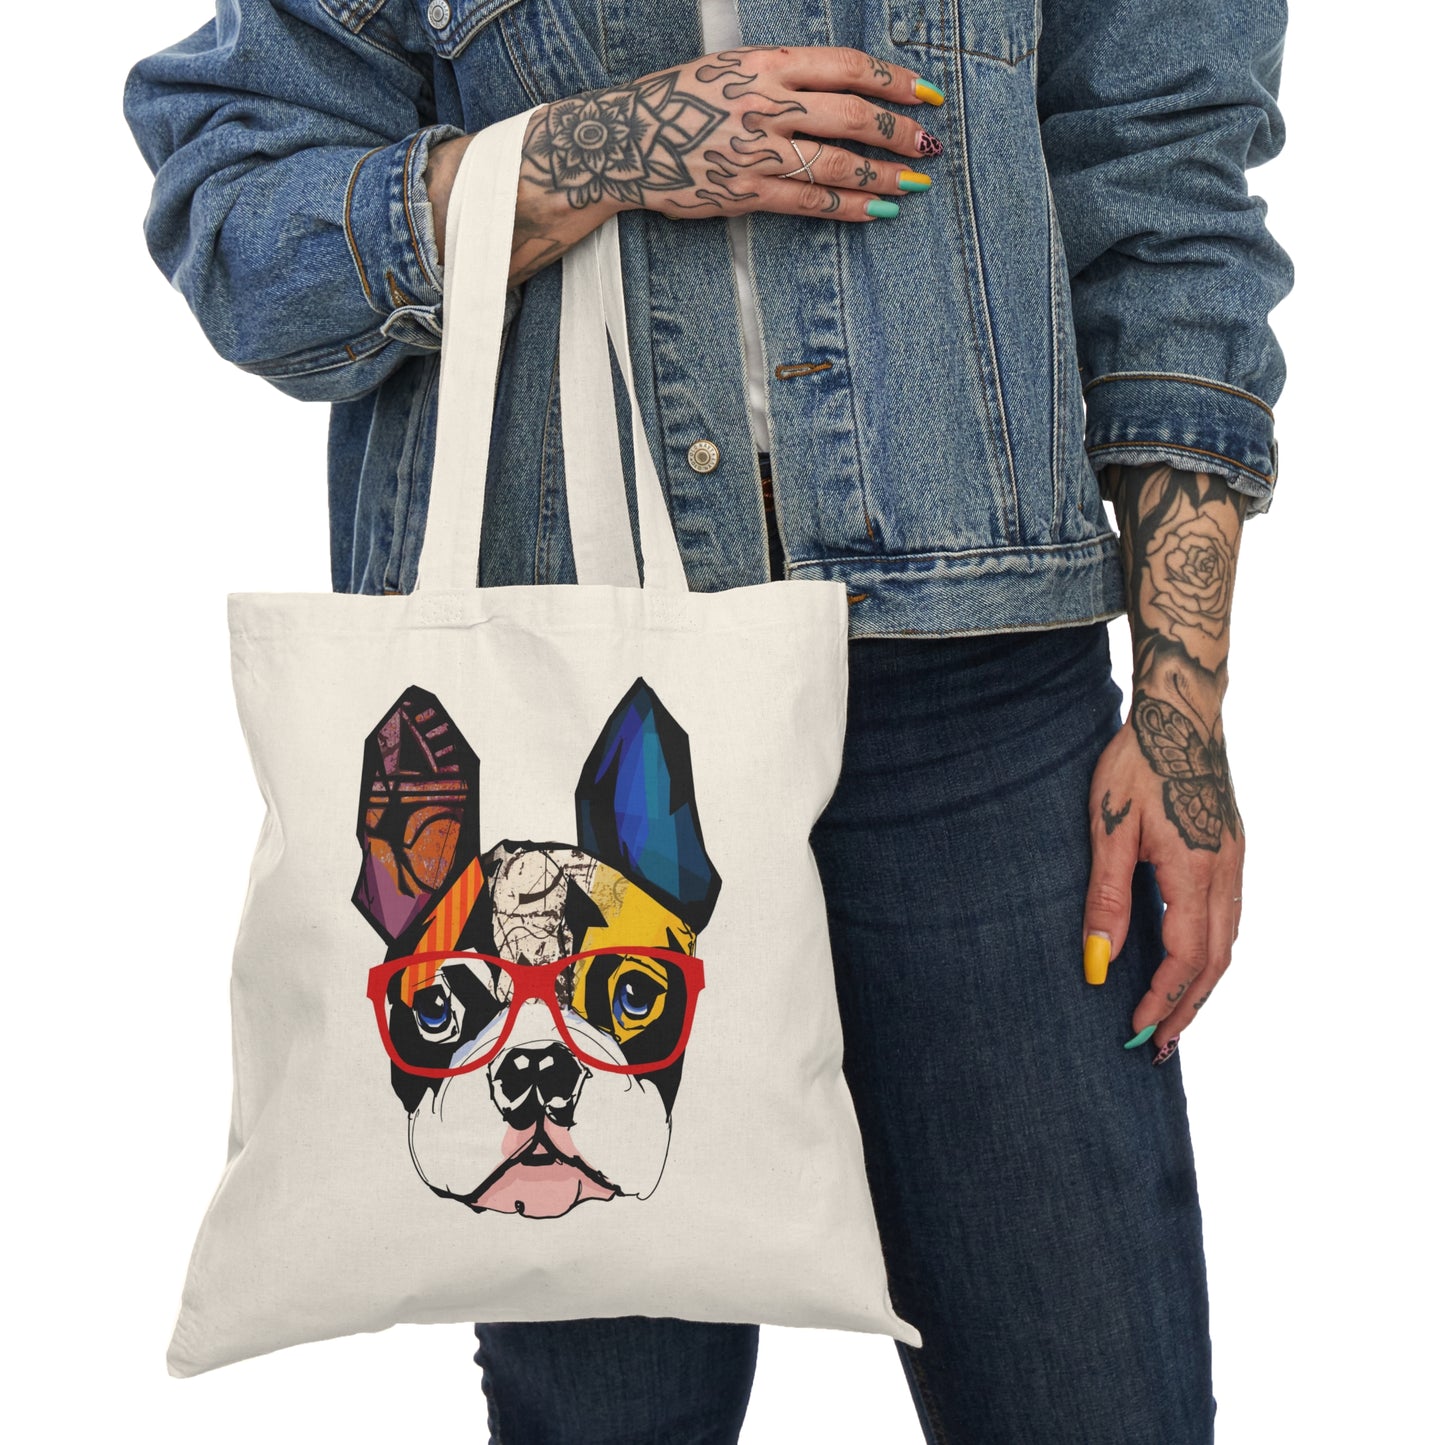 Dog with Glasses - Natural Tote Bag ~ Sharon Dawn Collection